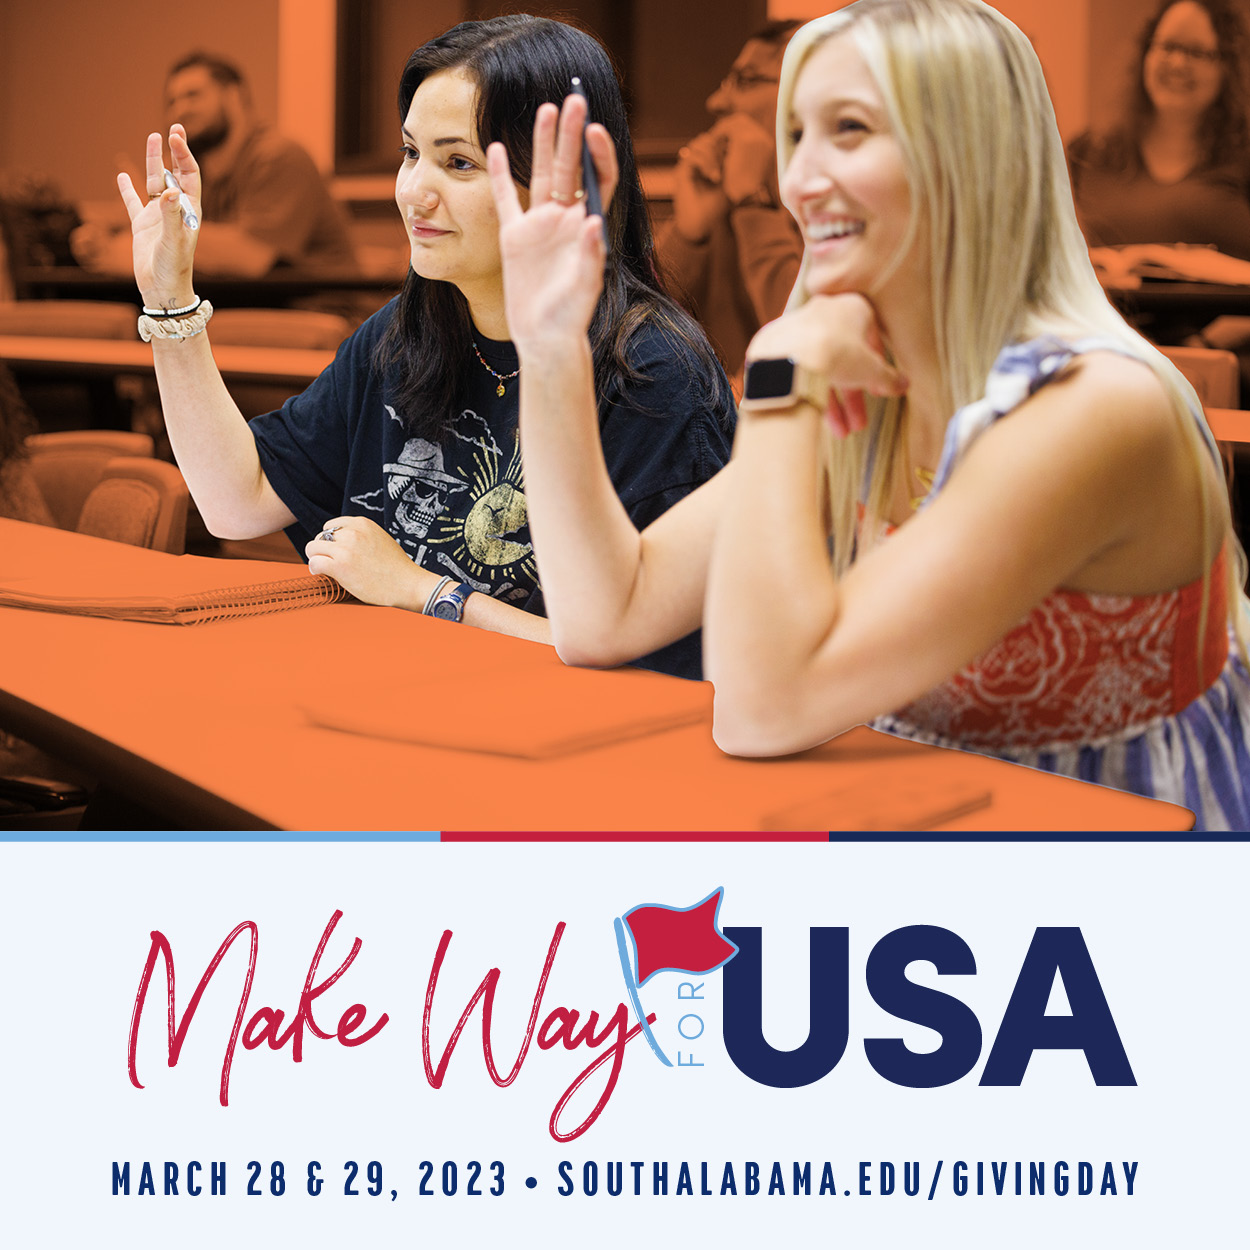 Make Way for USA March 28 and 29, 2023 Southalabama.edu/givingday with image of USA students in classroom.